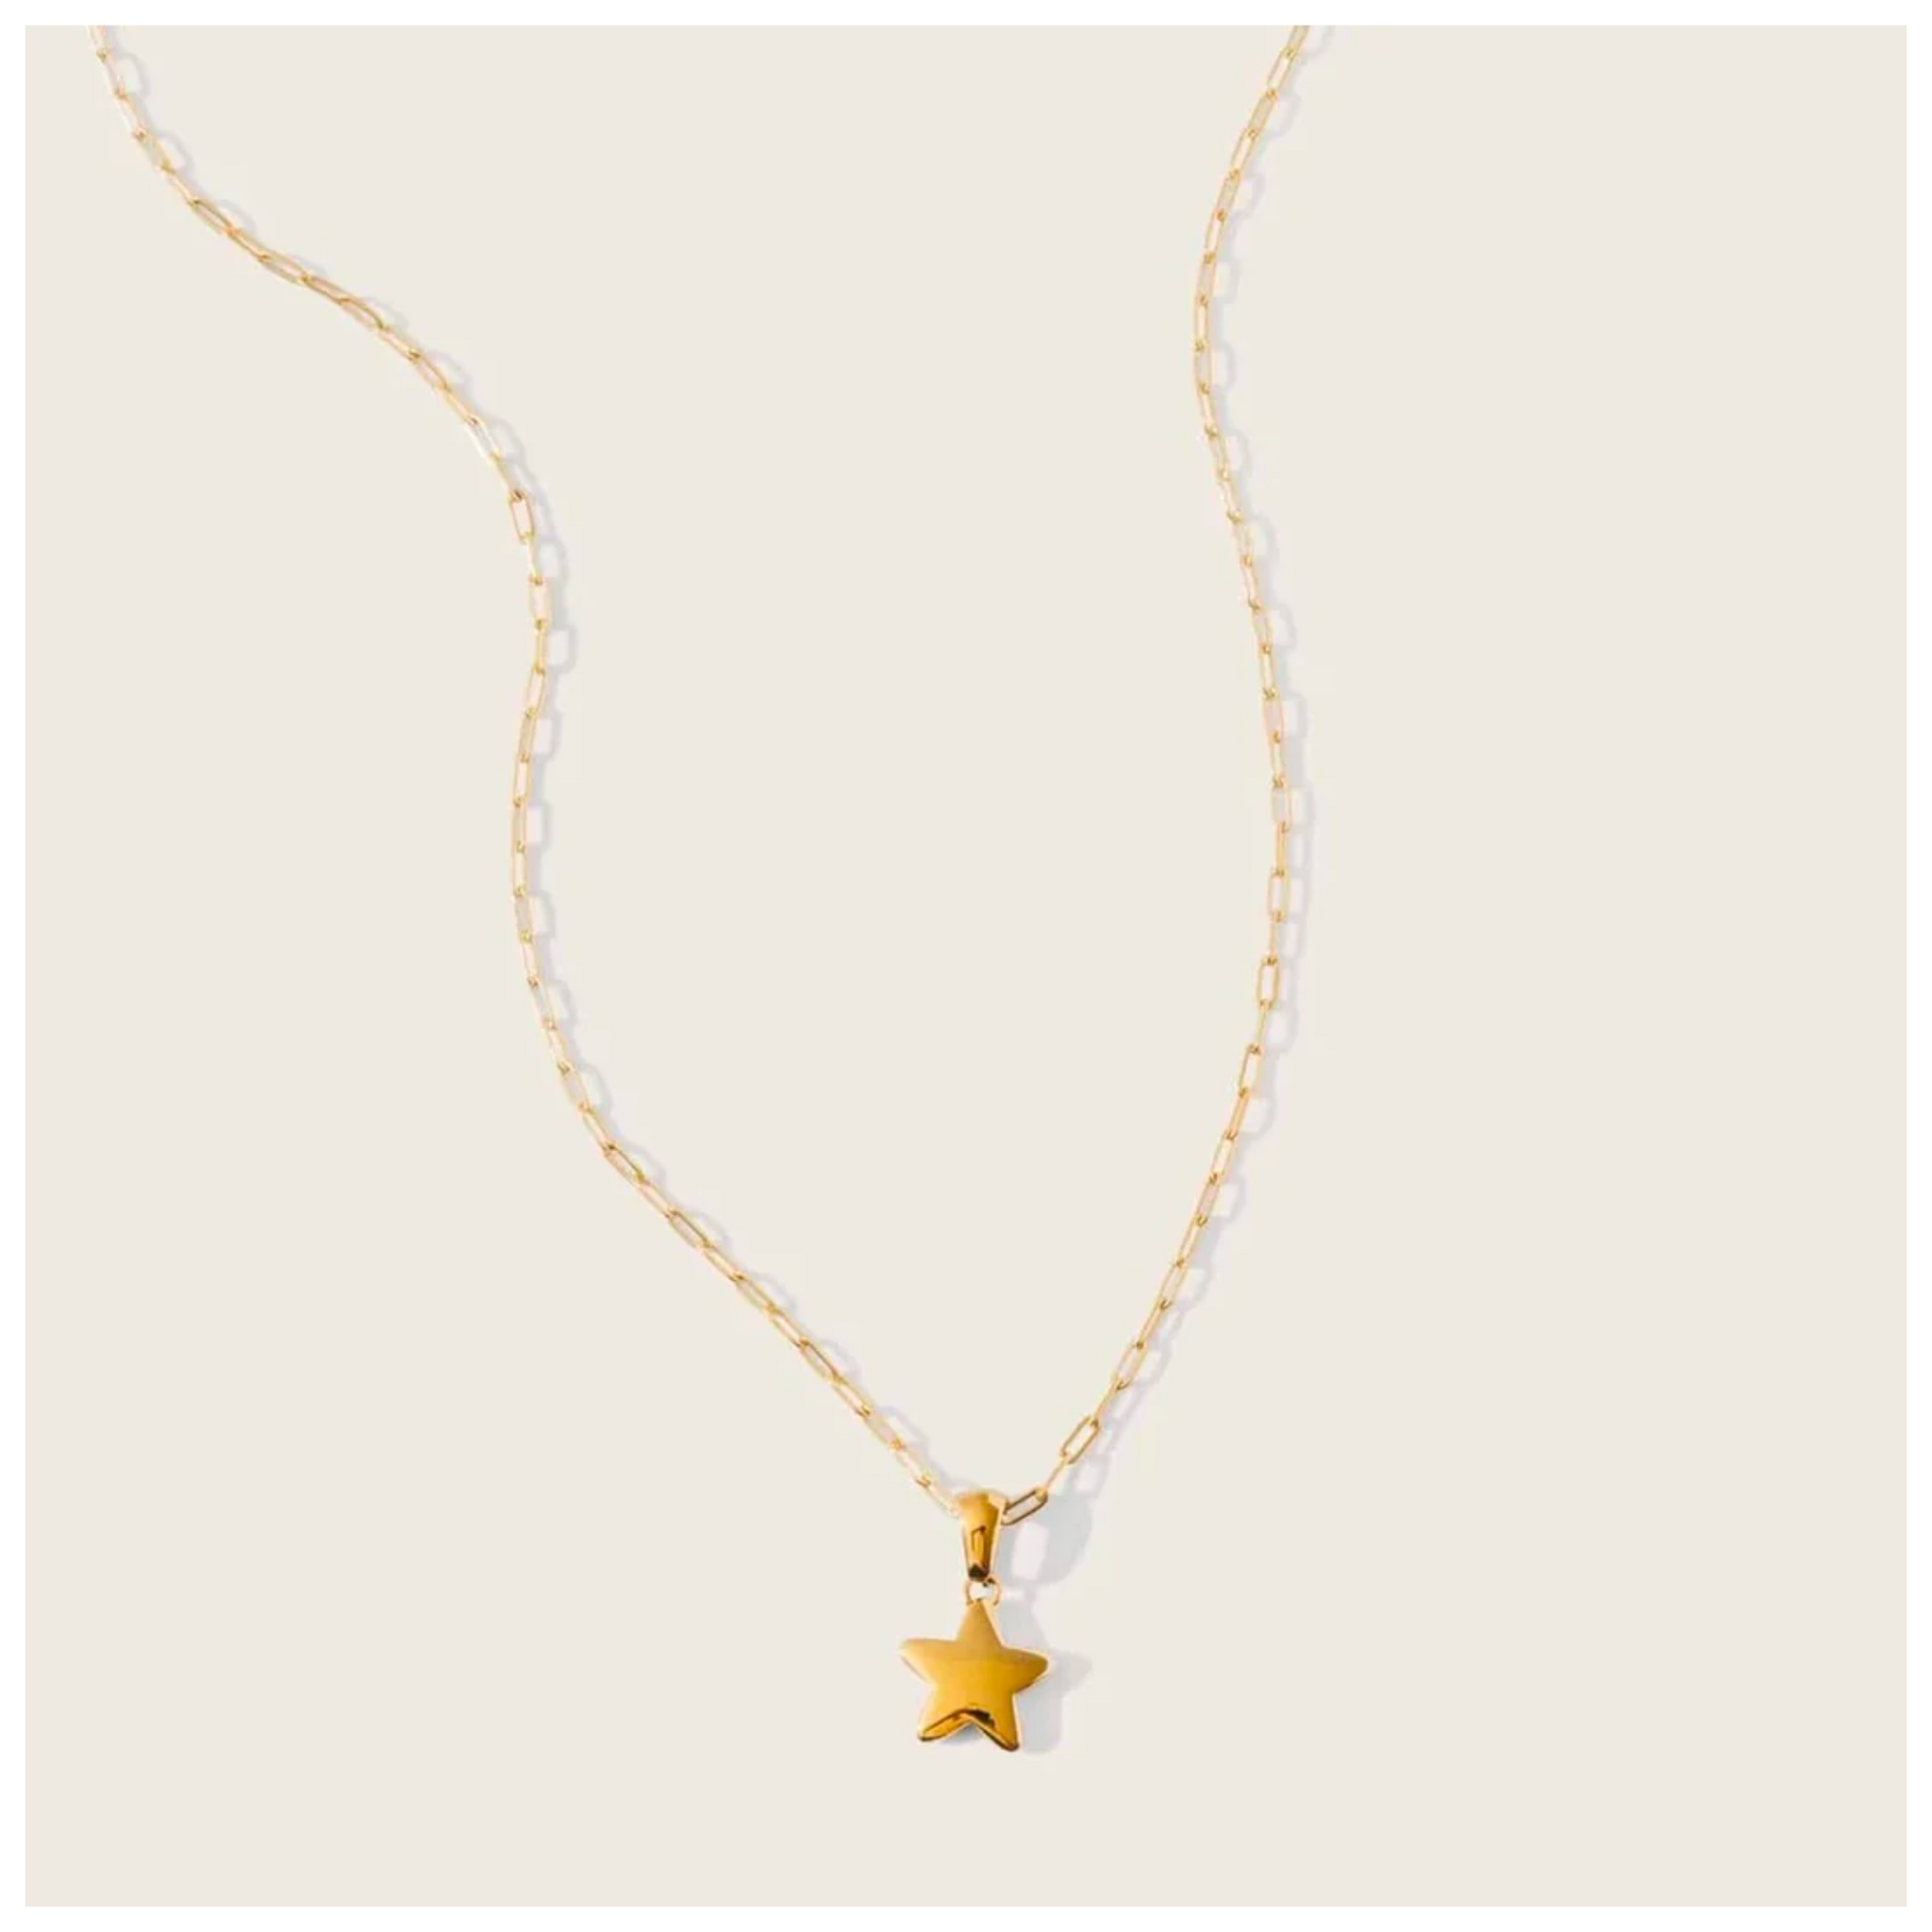 Star Bright Necklace in Gold